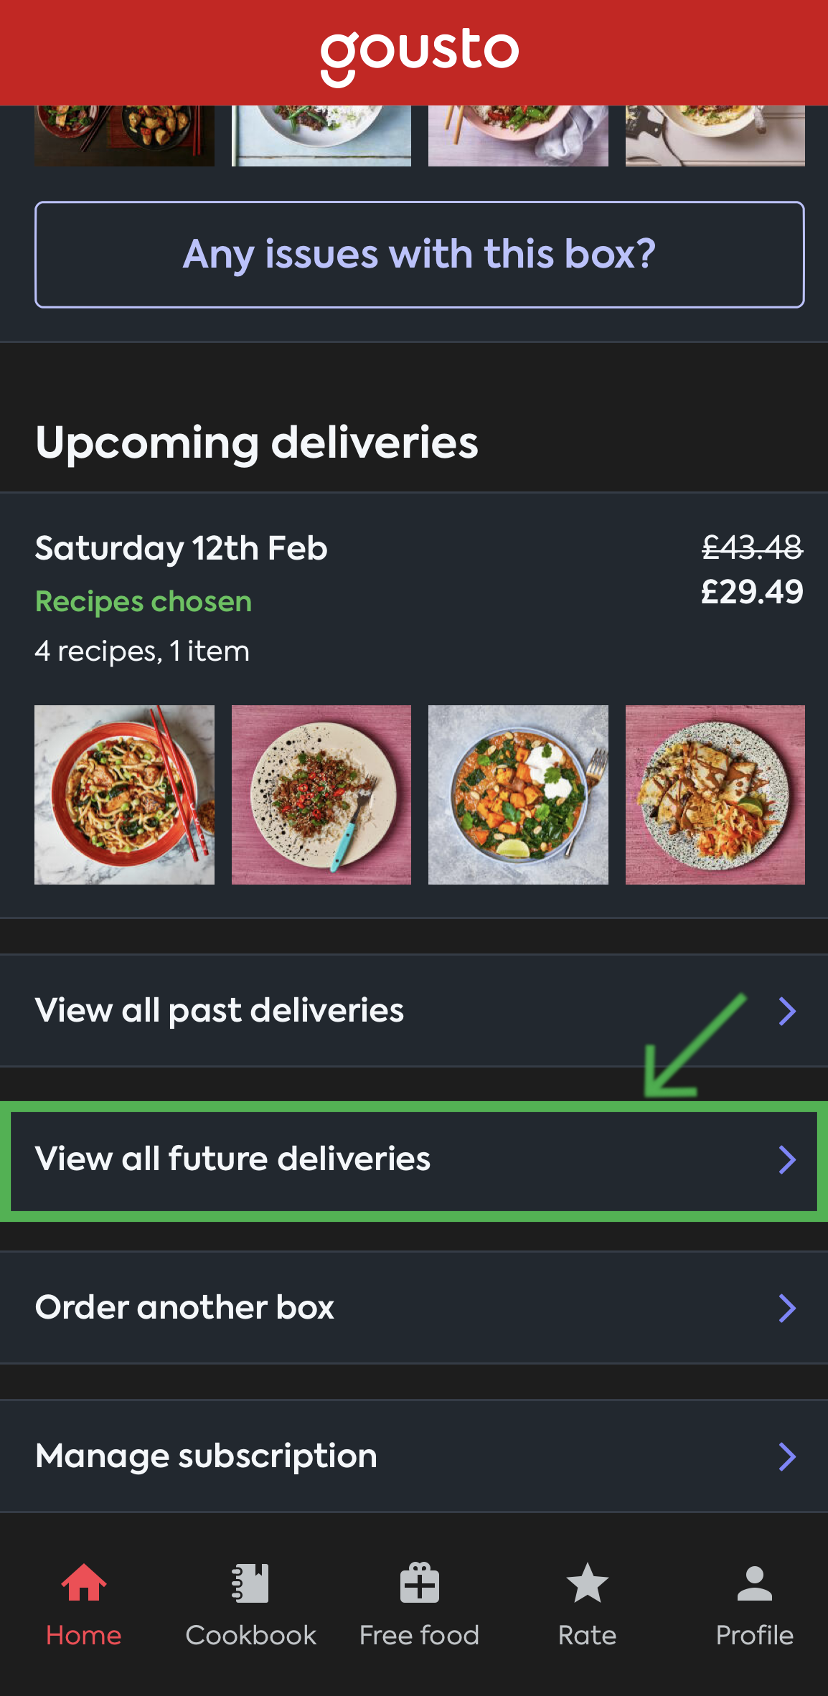 Home-View_All_Future_Deliveries.png